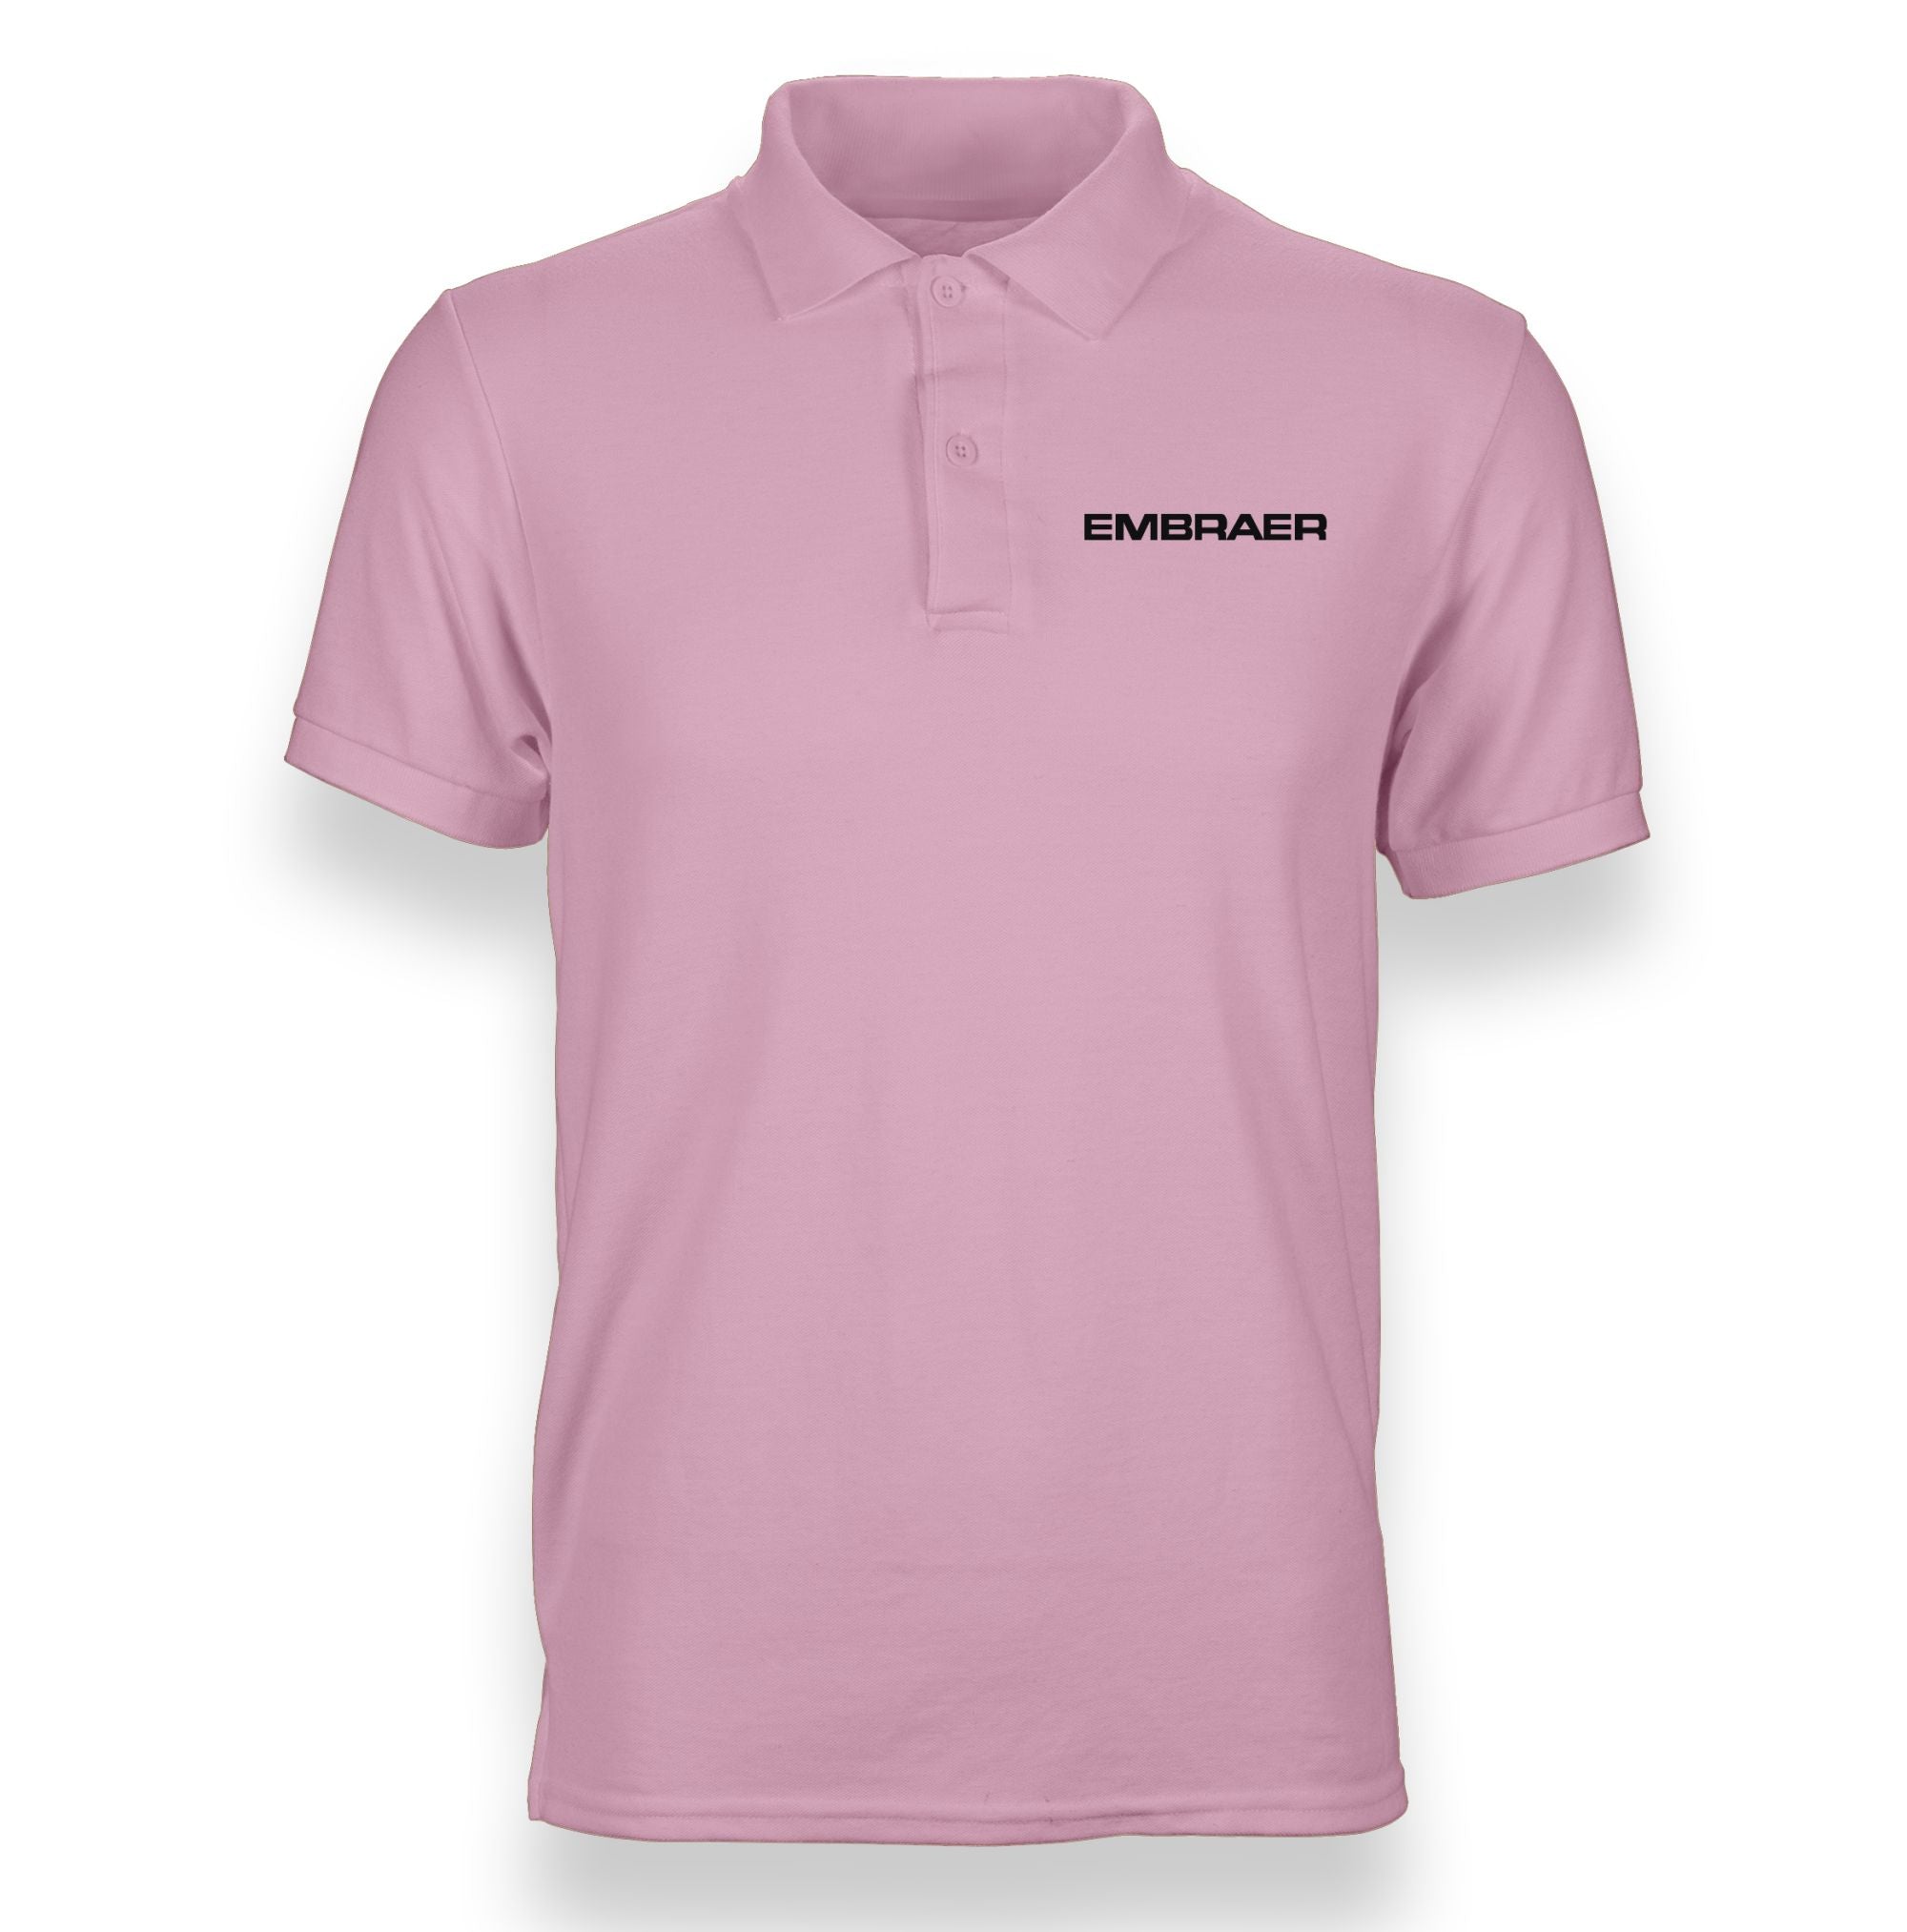 Embraer & Text Designed "WOMEN" Polo T-Shirts